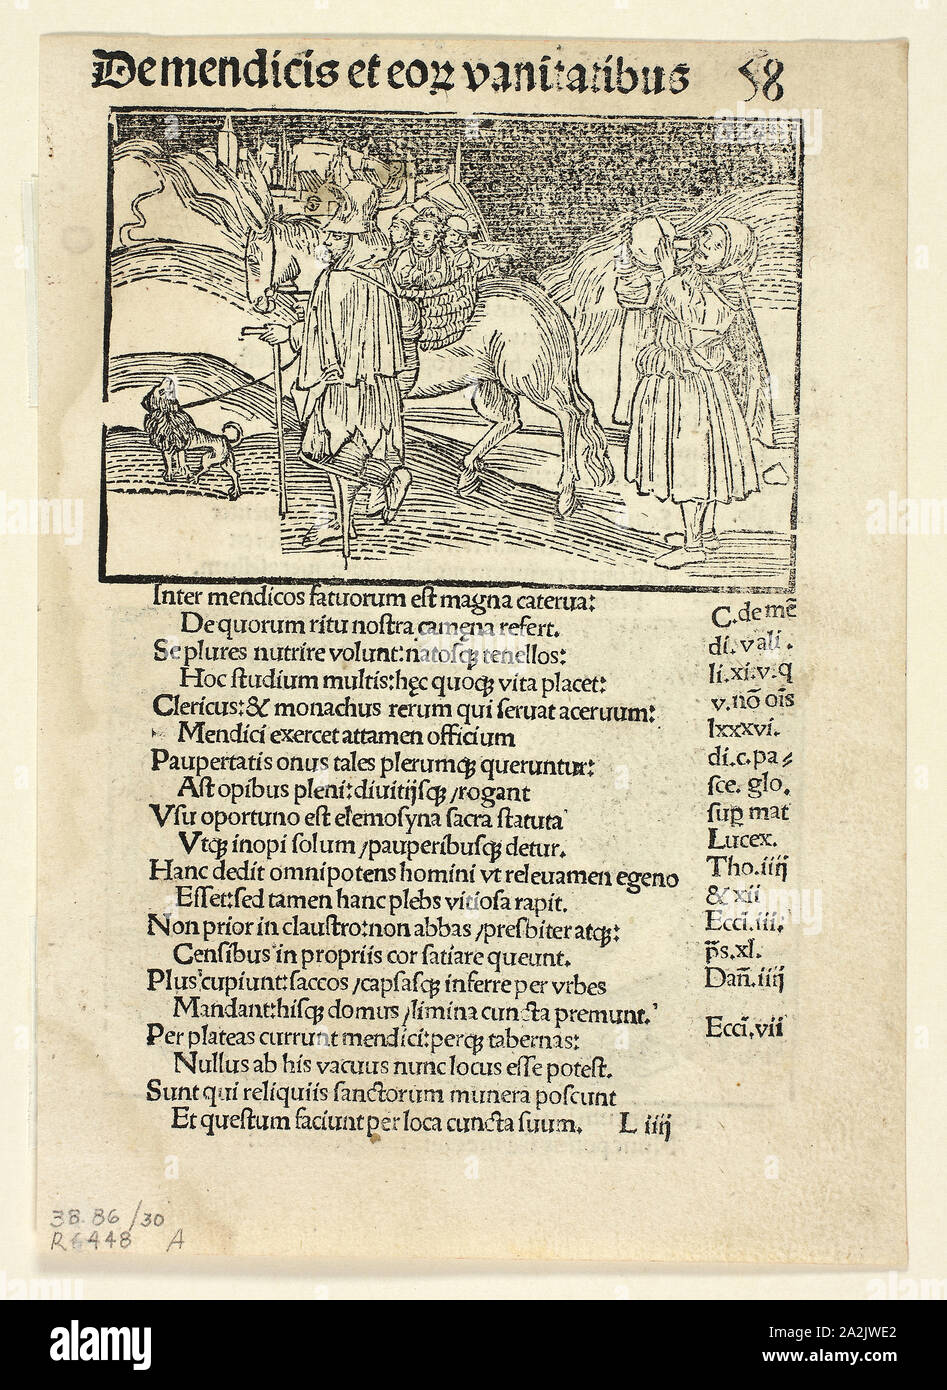 Beggars and Their Vanities (recto) and Of Irate Women (verso) from Navis Stultifera (Ship of Fools), Plate 30 from Woodcuts from Books of the 15th Century, 1497, portfolio assembled 1929, Unknown Artist (Strasbourg, late 15th century), printed and published by Johann Reinhard Grüninger (German, c. 1455–1532), original text by Sebastian Brant (German, 1457–1521), portfolio text by Wilhelm Ludwig Schreiber (German, 1855–1932), Germany, Woodcut and letterpress in black (recto and verso) on cream laid paper, tipped onto cream wove paper mat, 76 x 111 mm (image, recto), 78 x 111 mm (image, verso Stock Photo